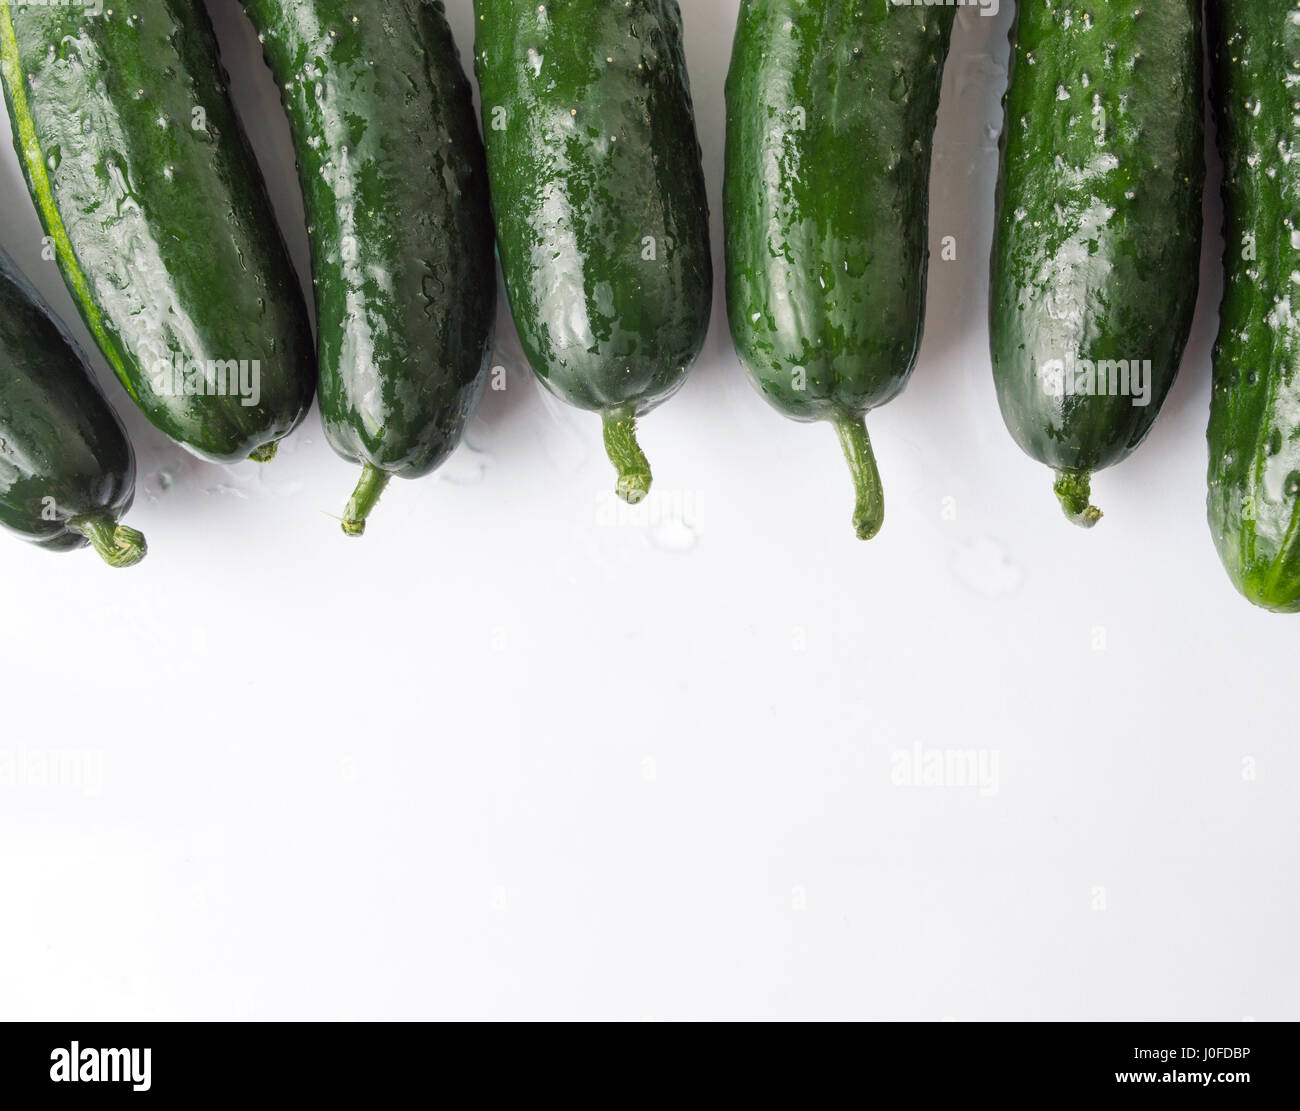 Wet cucumbers on a white wooden table Stock Photo